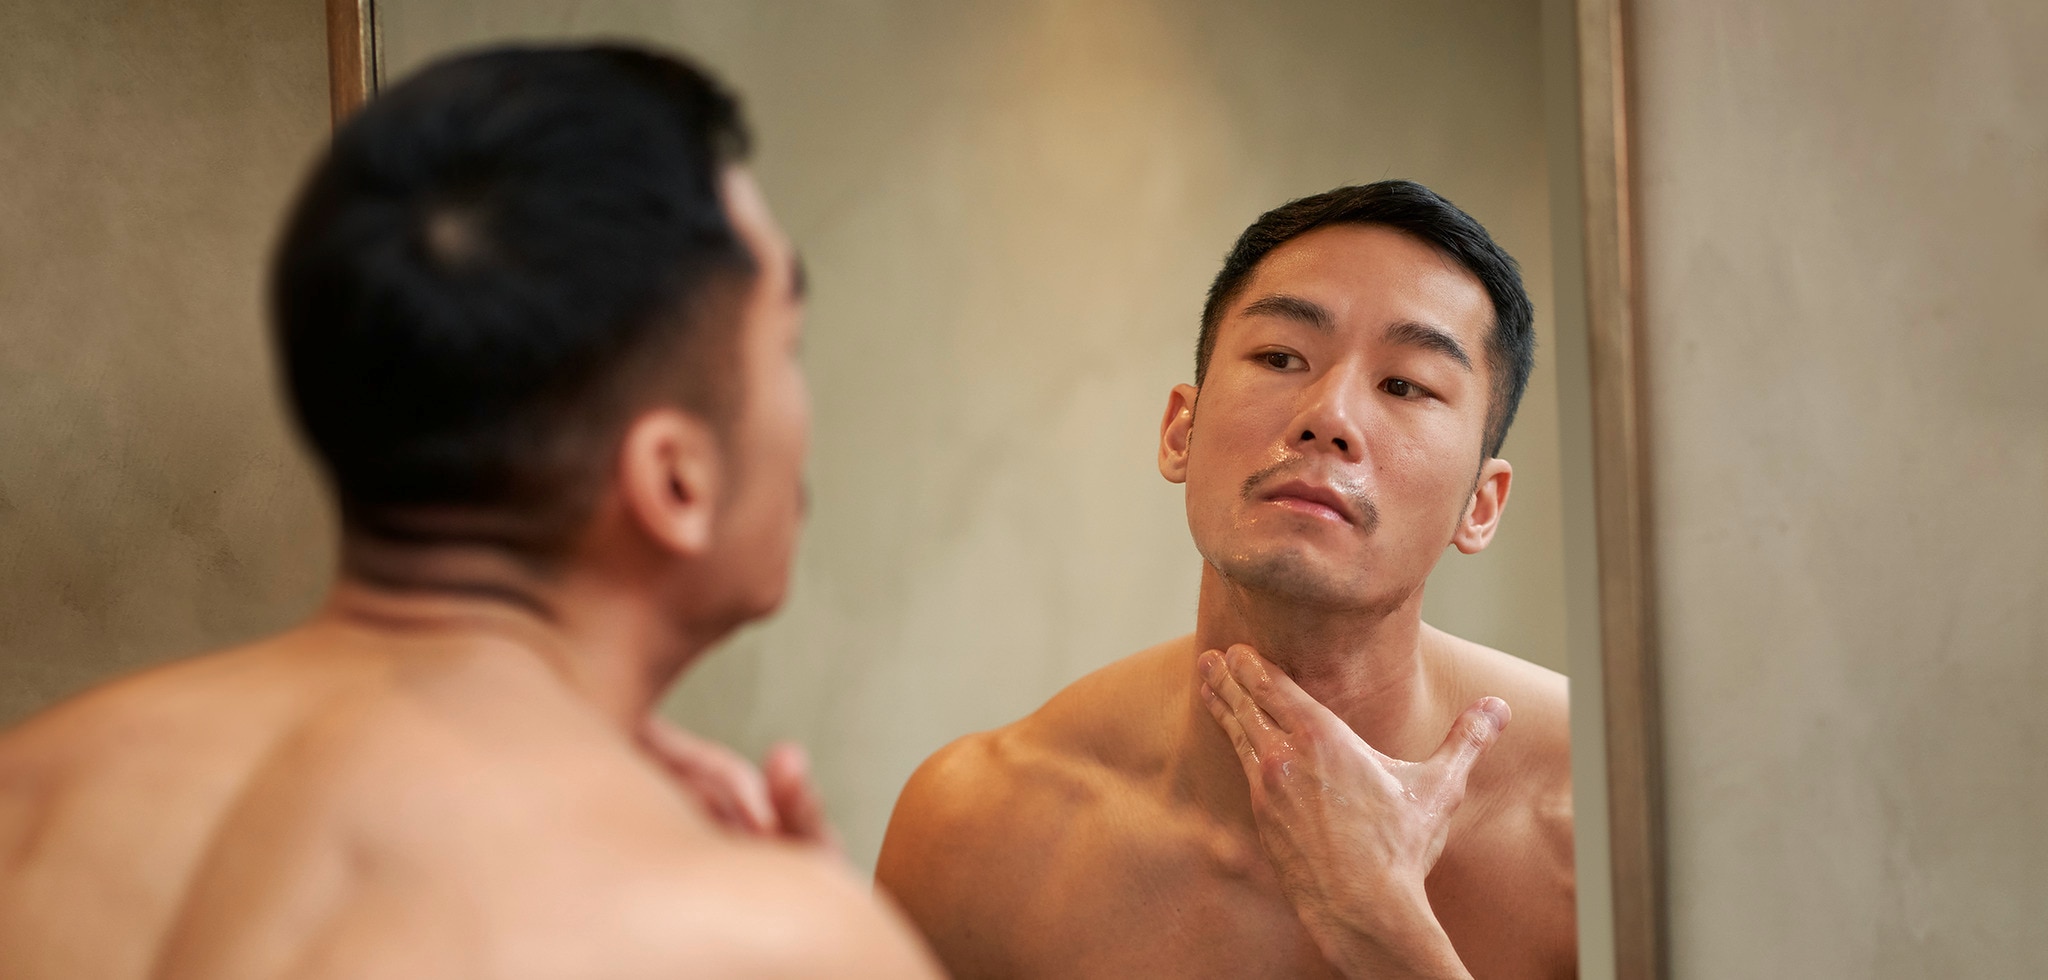 Dove Men+Care: Dull, uneven skin? Try our 3-step routine